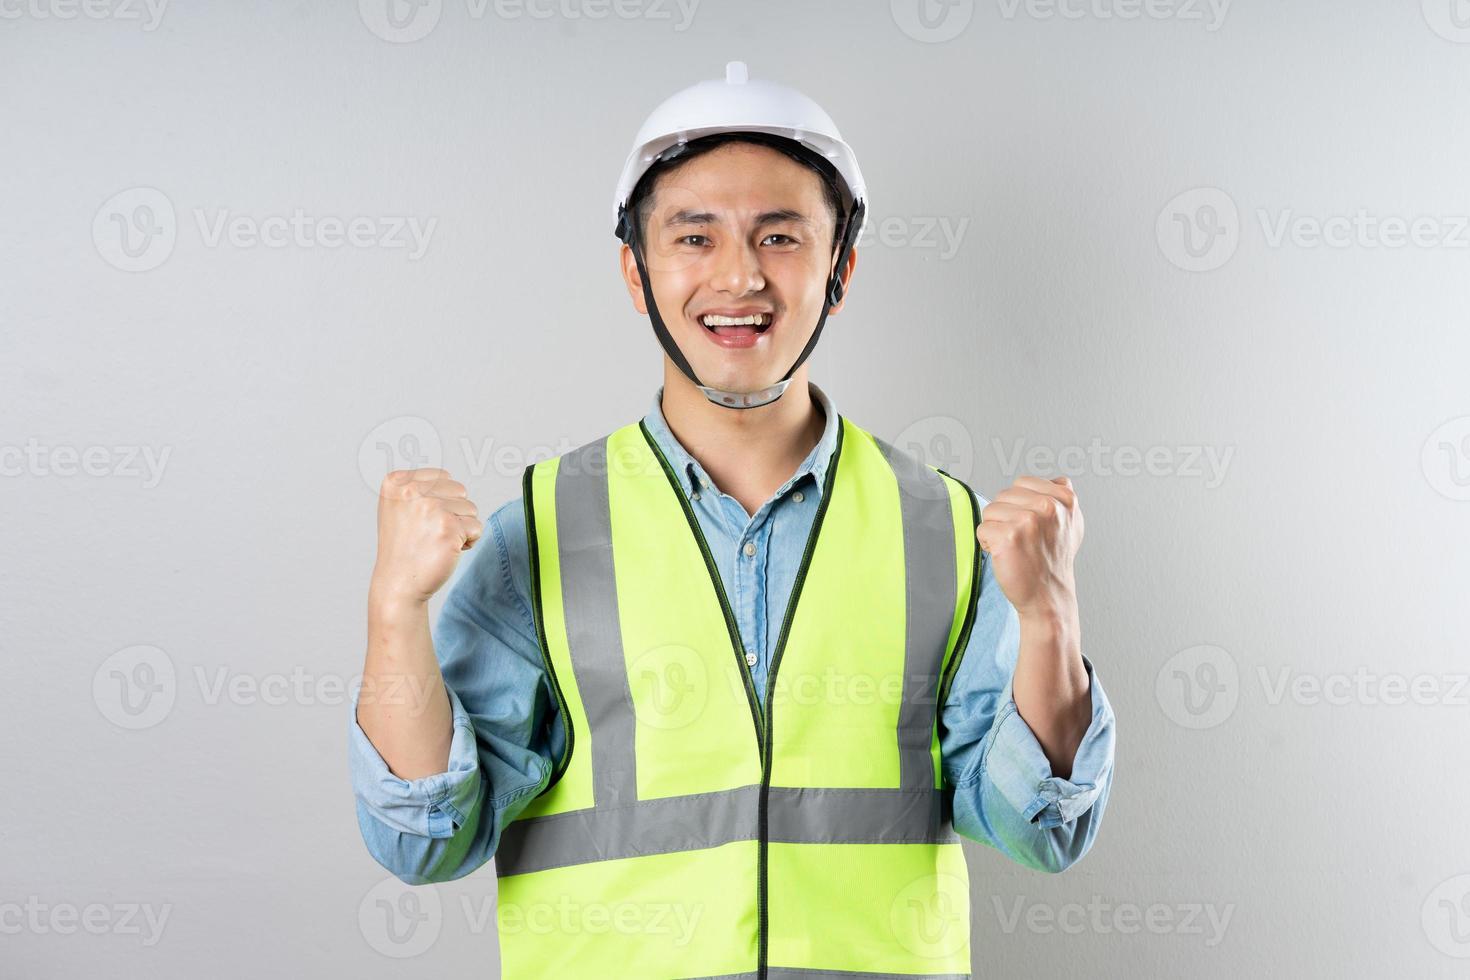 Asian engineer portrait on gray background photo